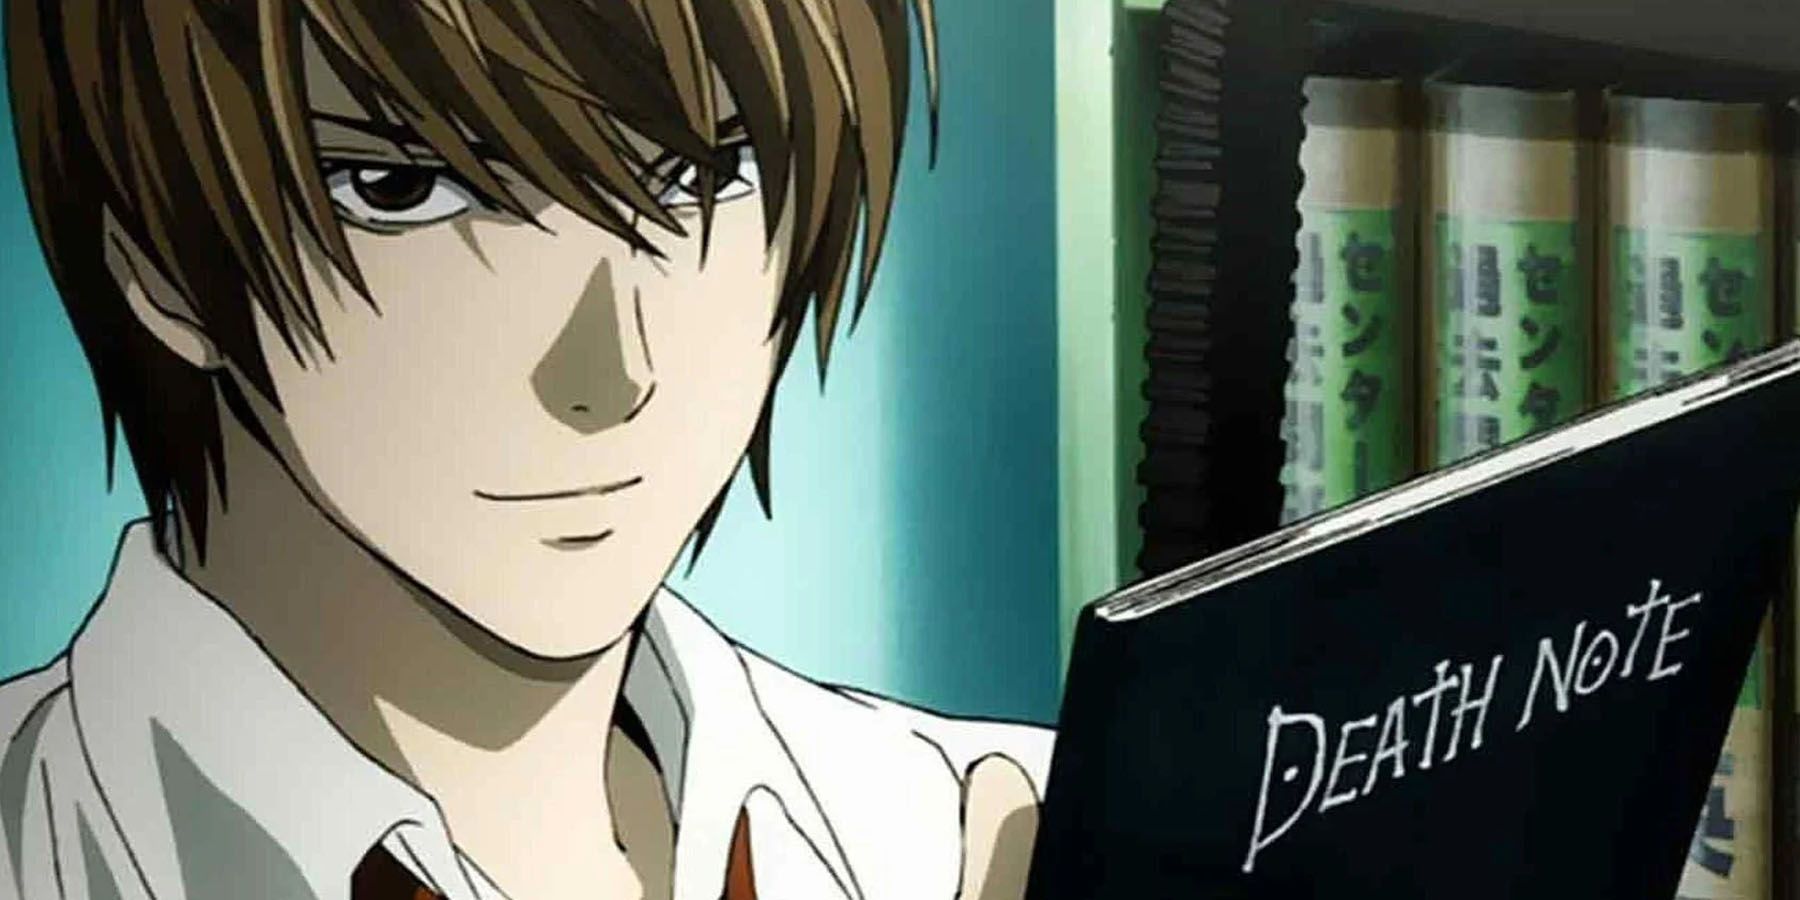 Light Yagami Smiling With The Death Note